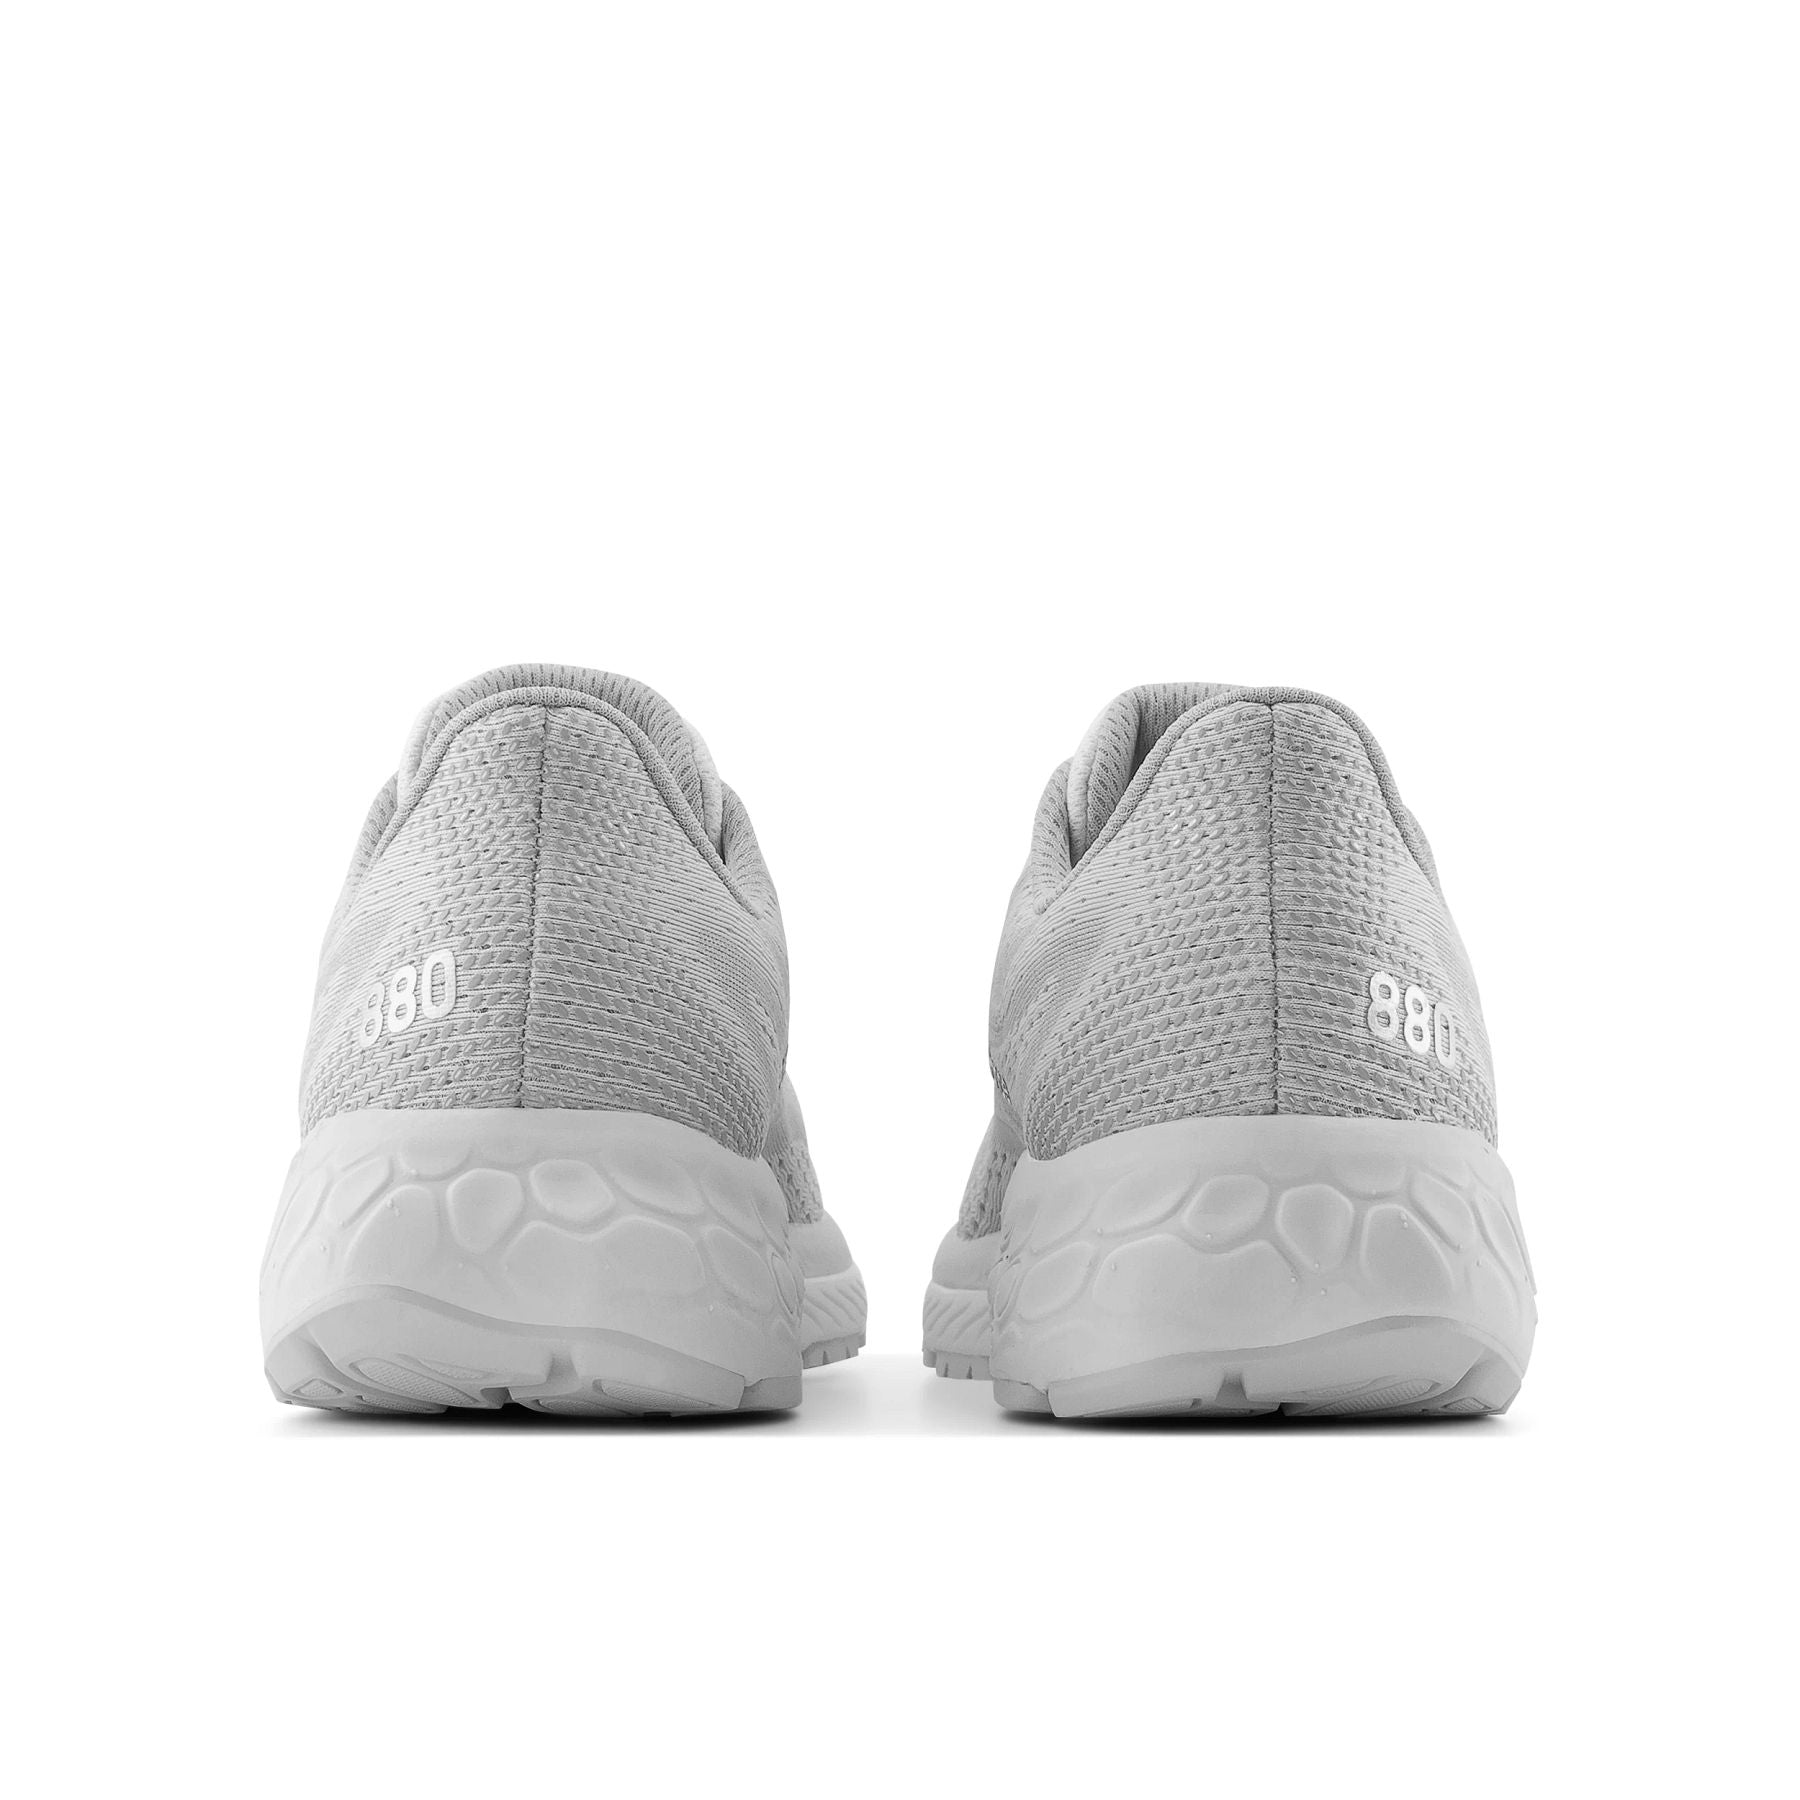 Back view of the Women's New Balance 880 V13 in the color White